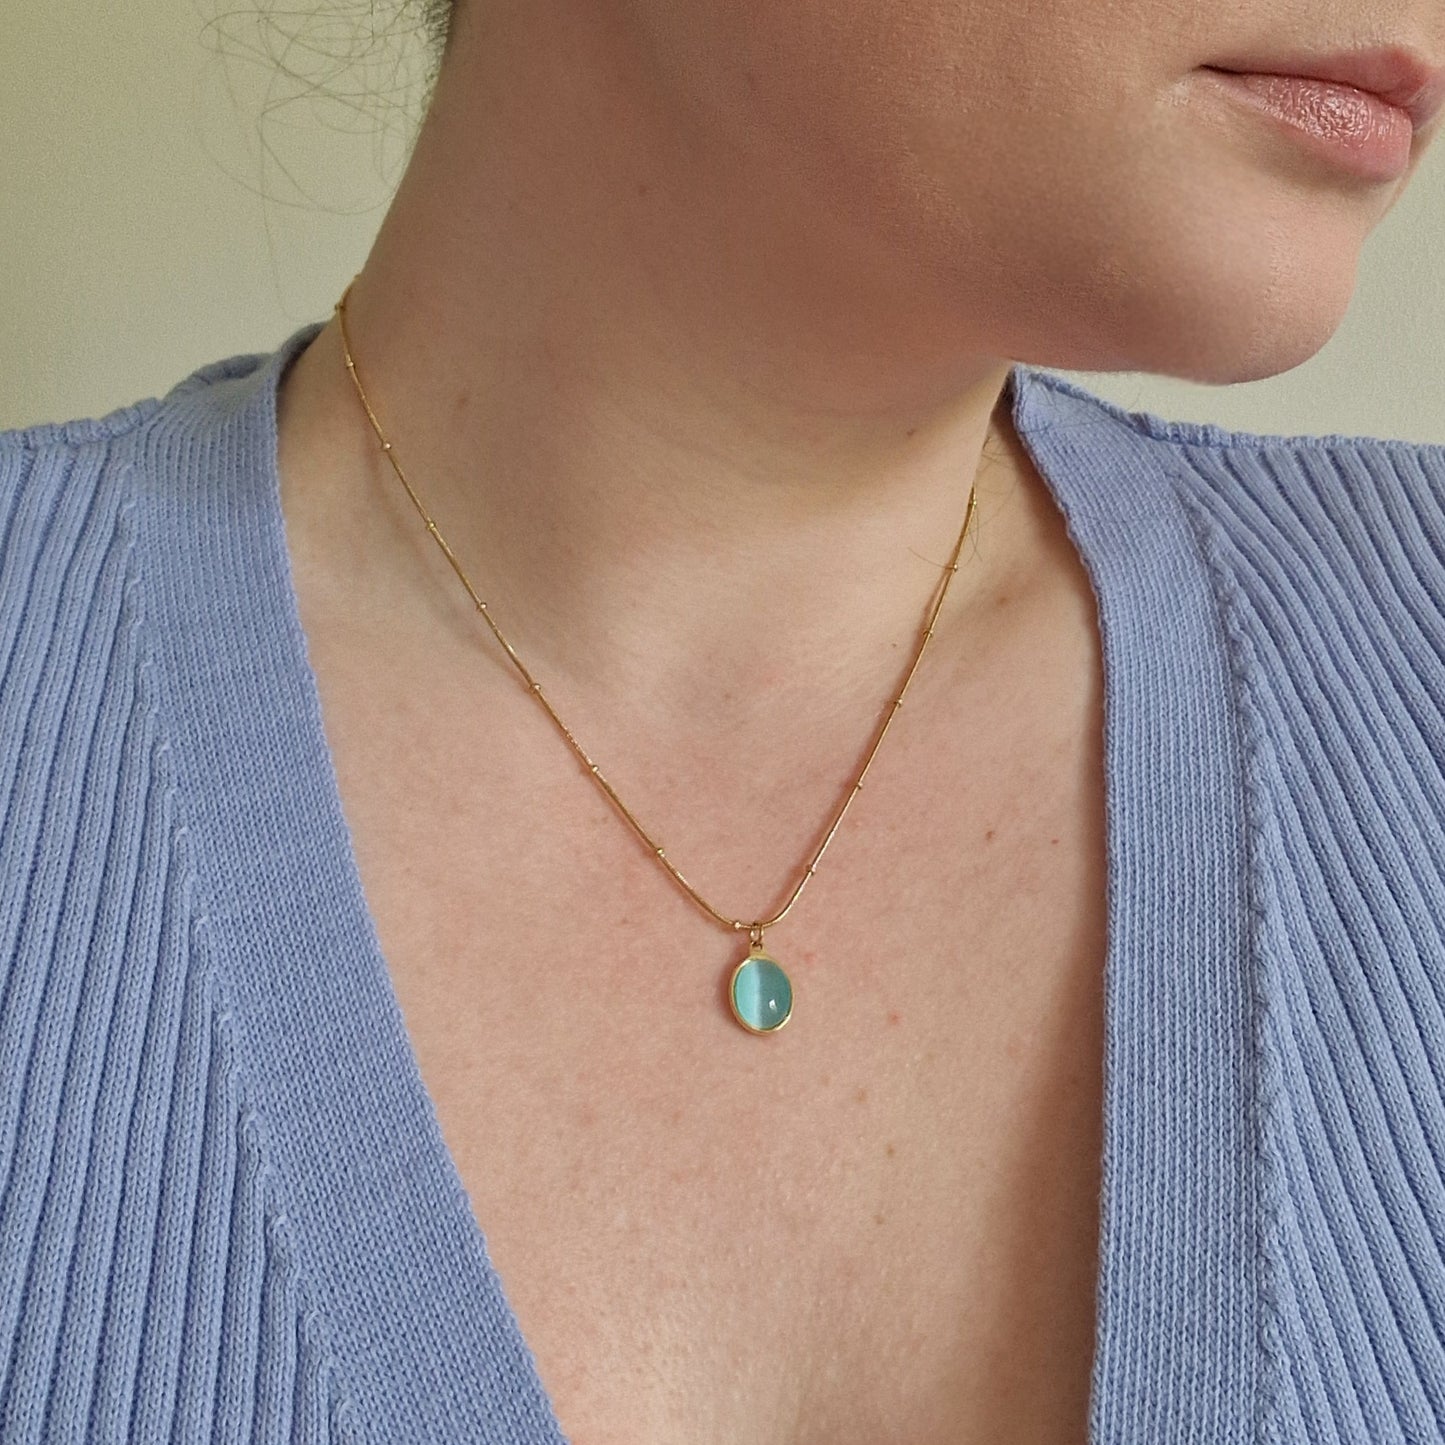 woman wearing gold beaded necklace with an oval aquamarine pendant.